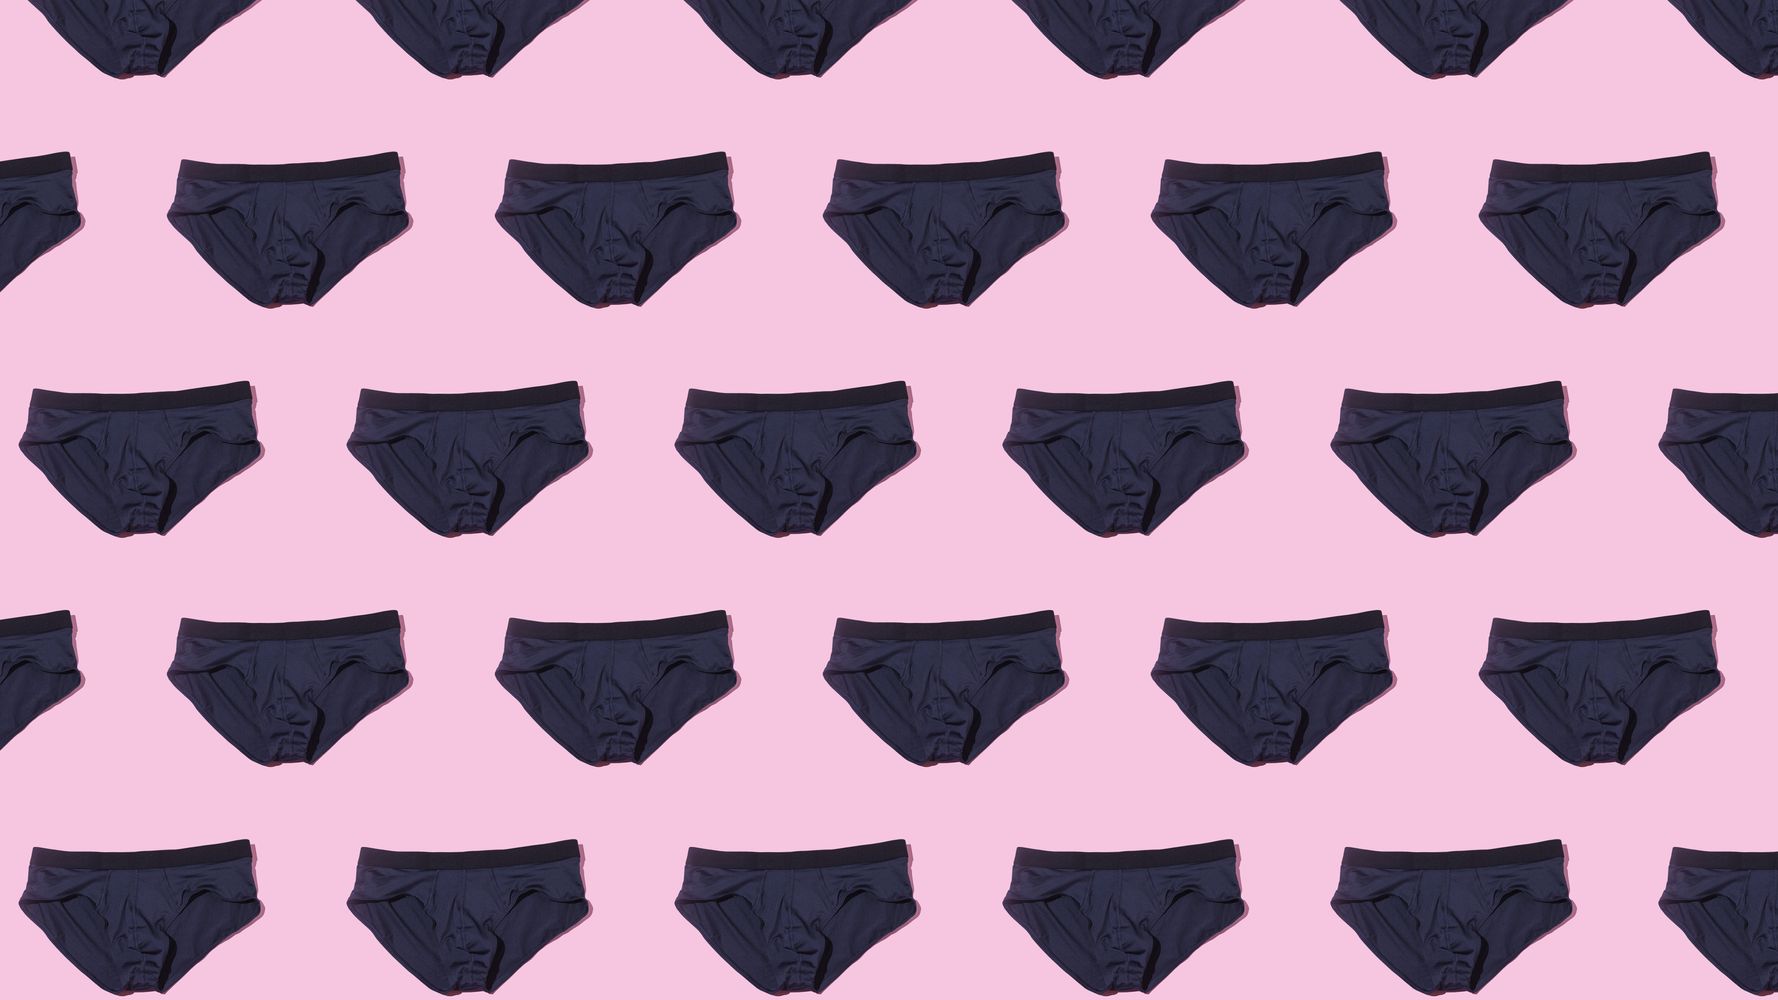 Panty Selling Guide | How To Make Money Selling Panties 